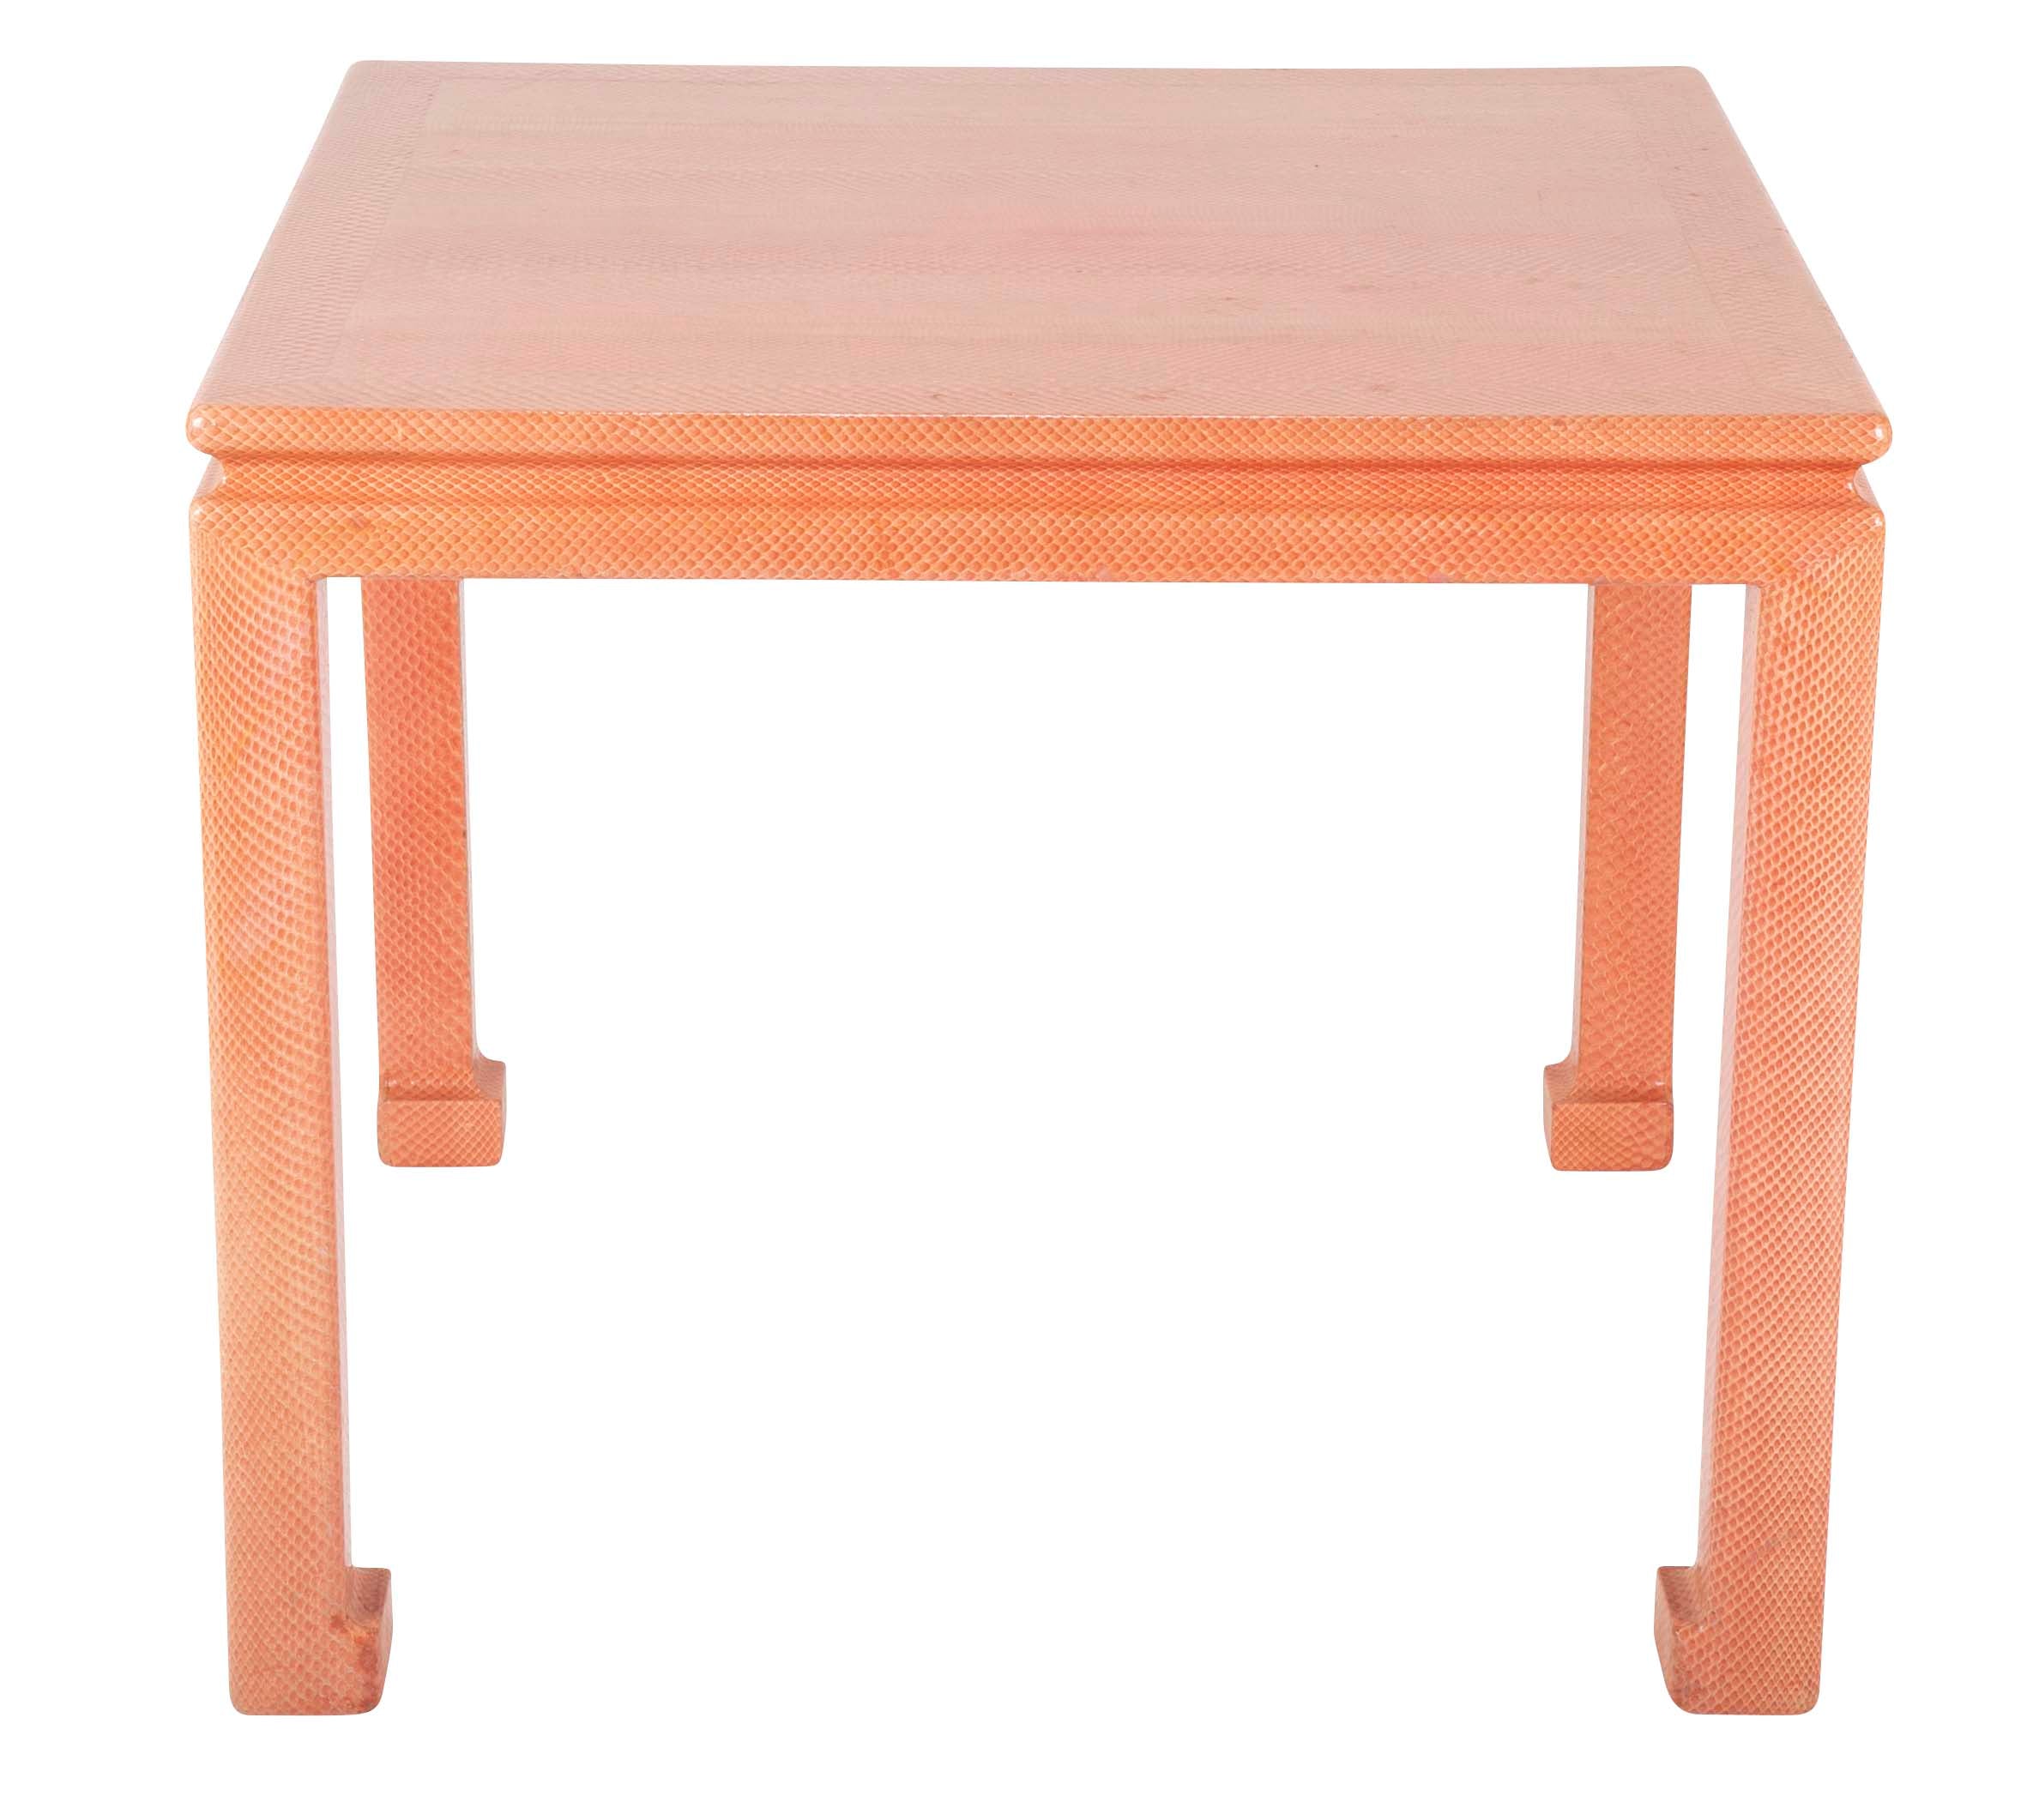 A Coral Colored Games Table Designed By Karl Springer In Snakeskin